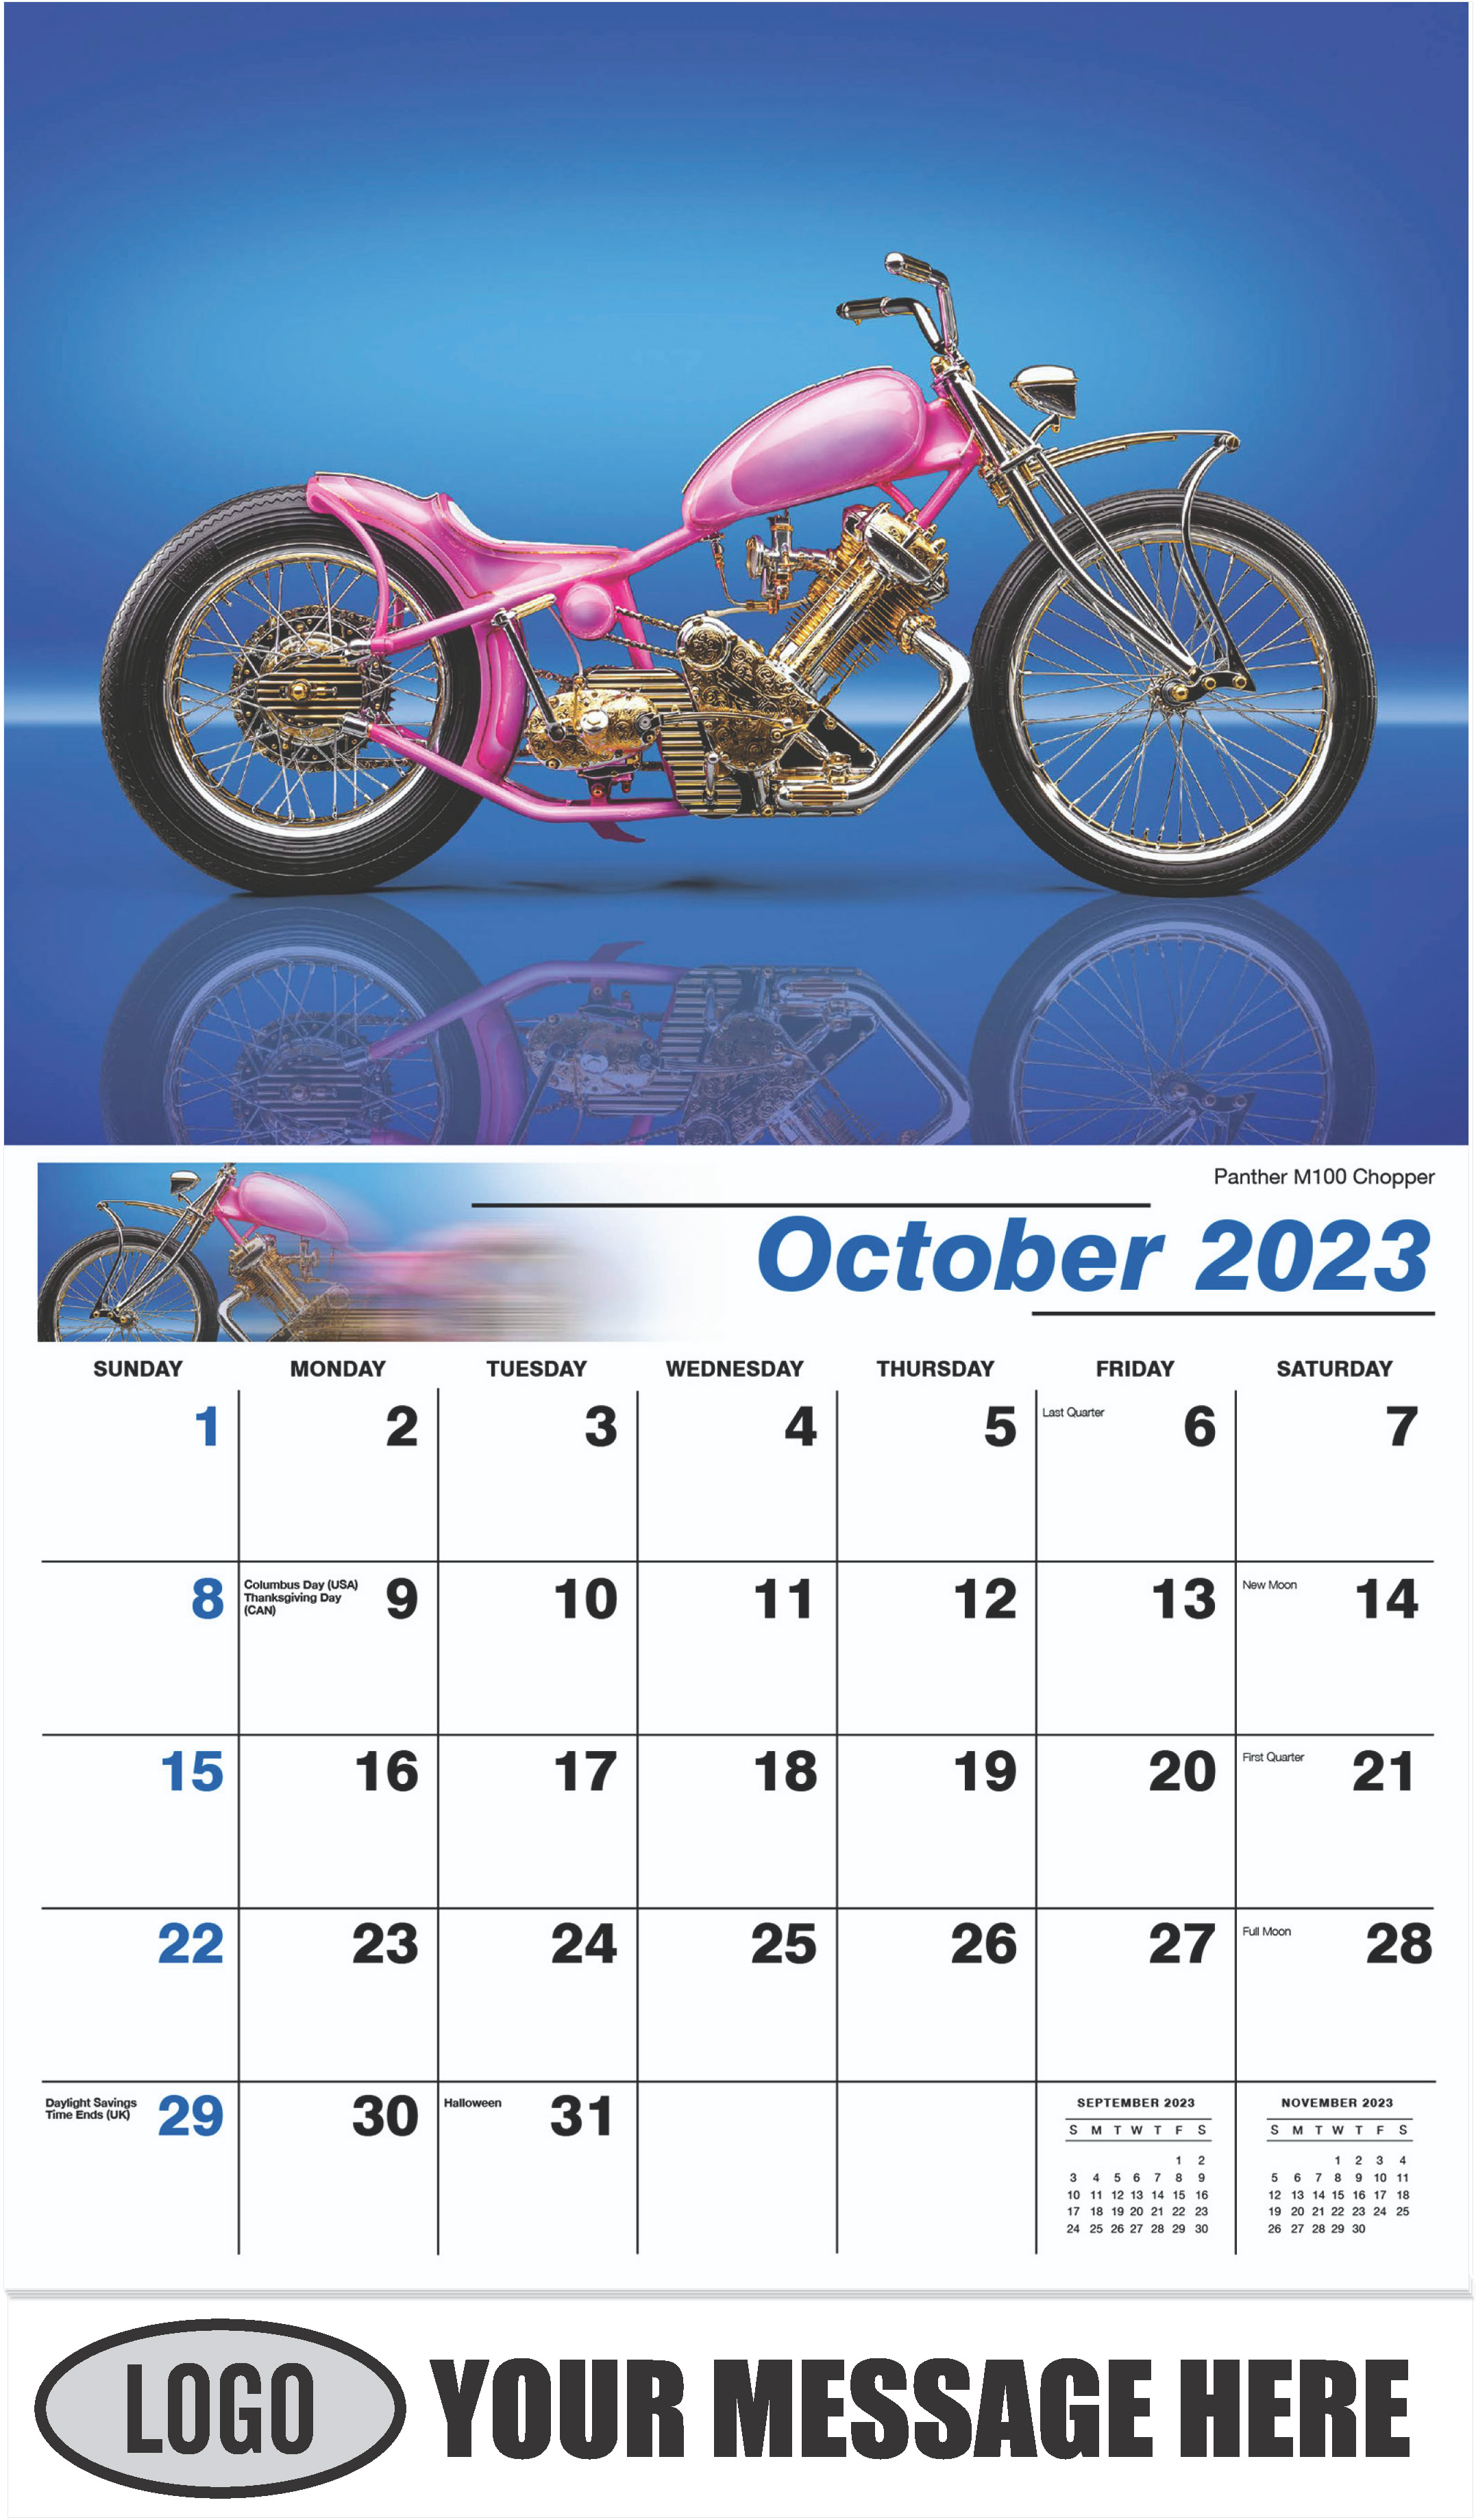 Panther M100 Chopper - October - Motorcycle Mania 2023 Promotional Calendar